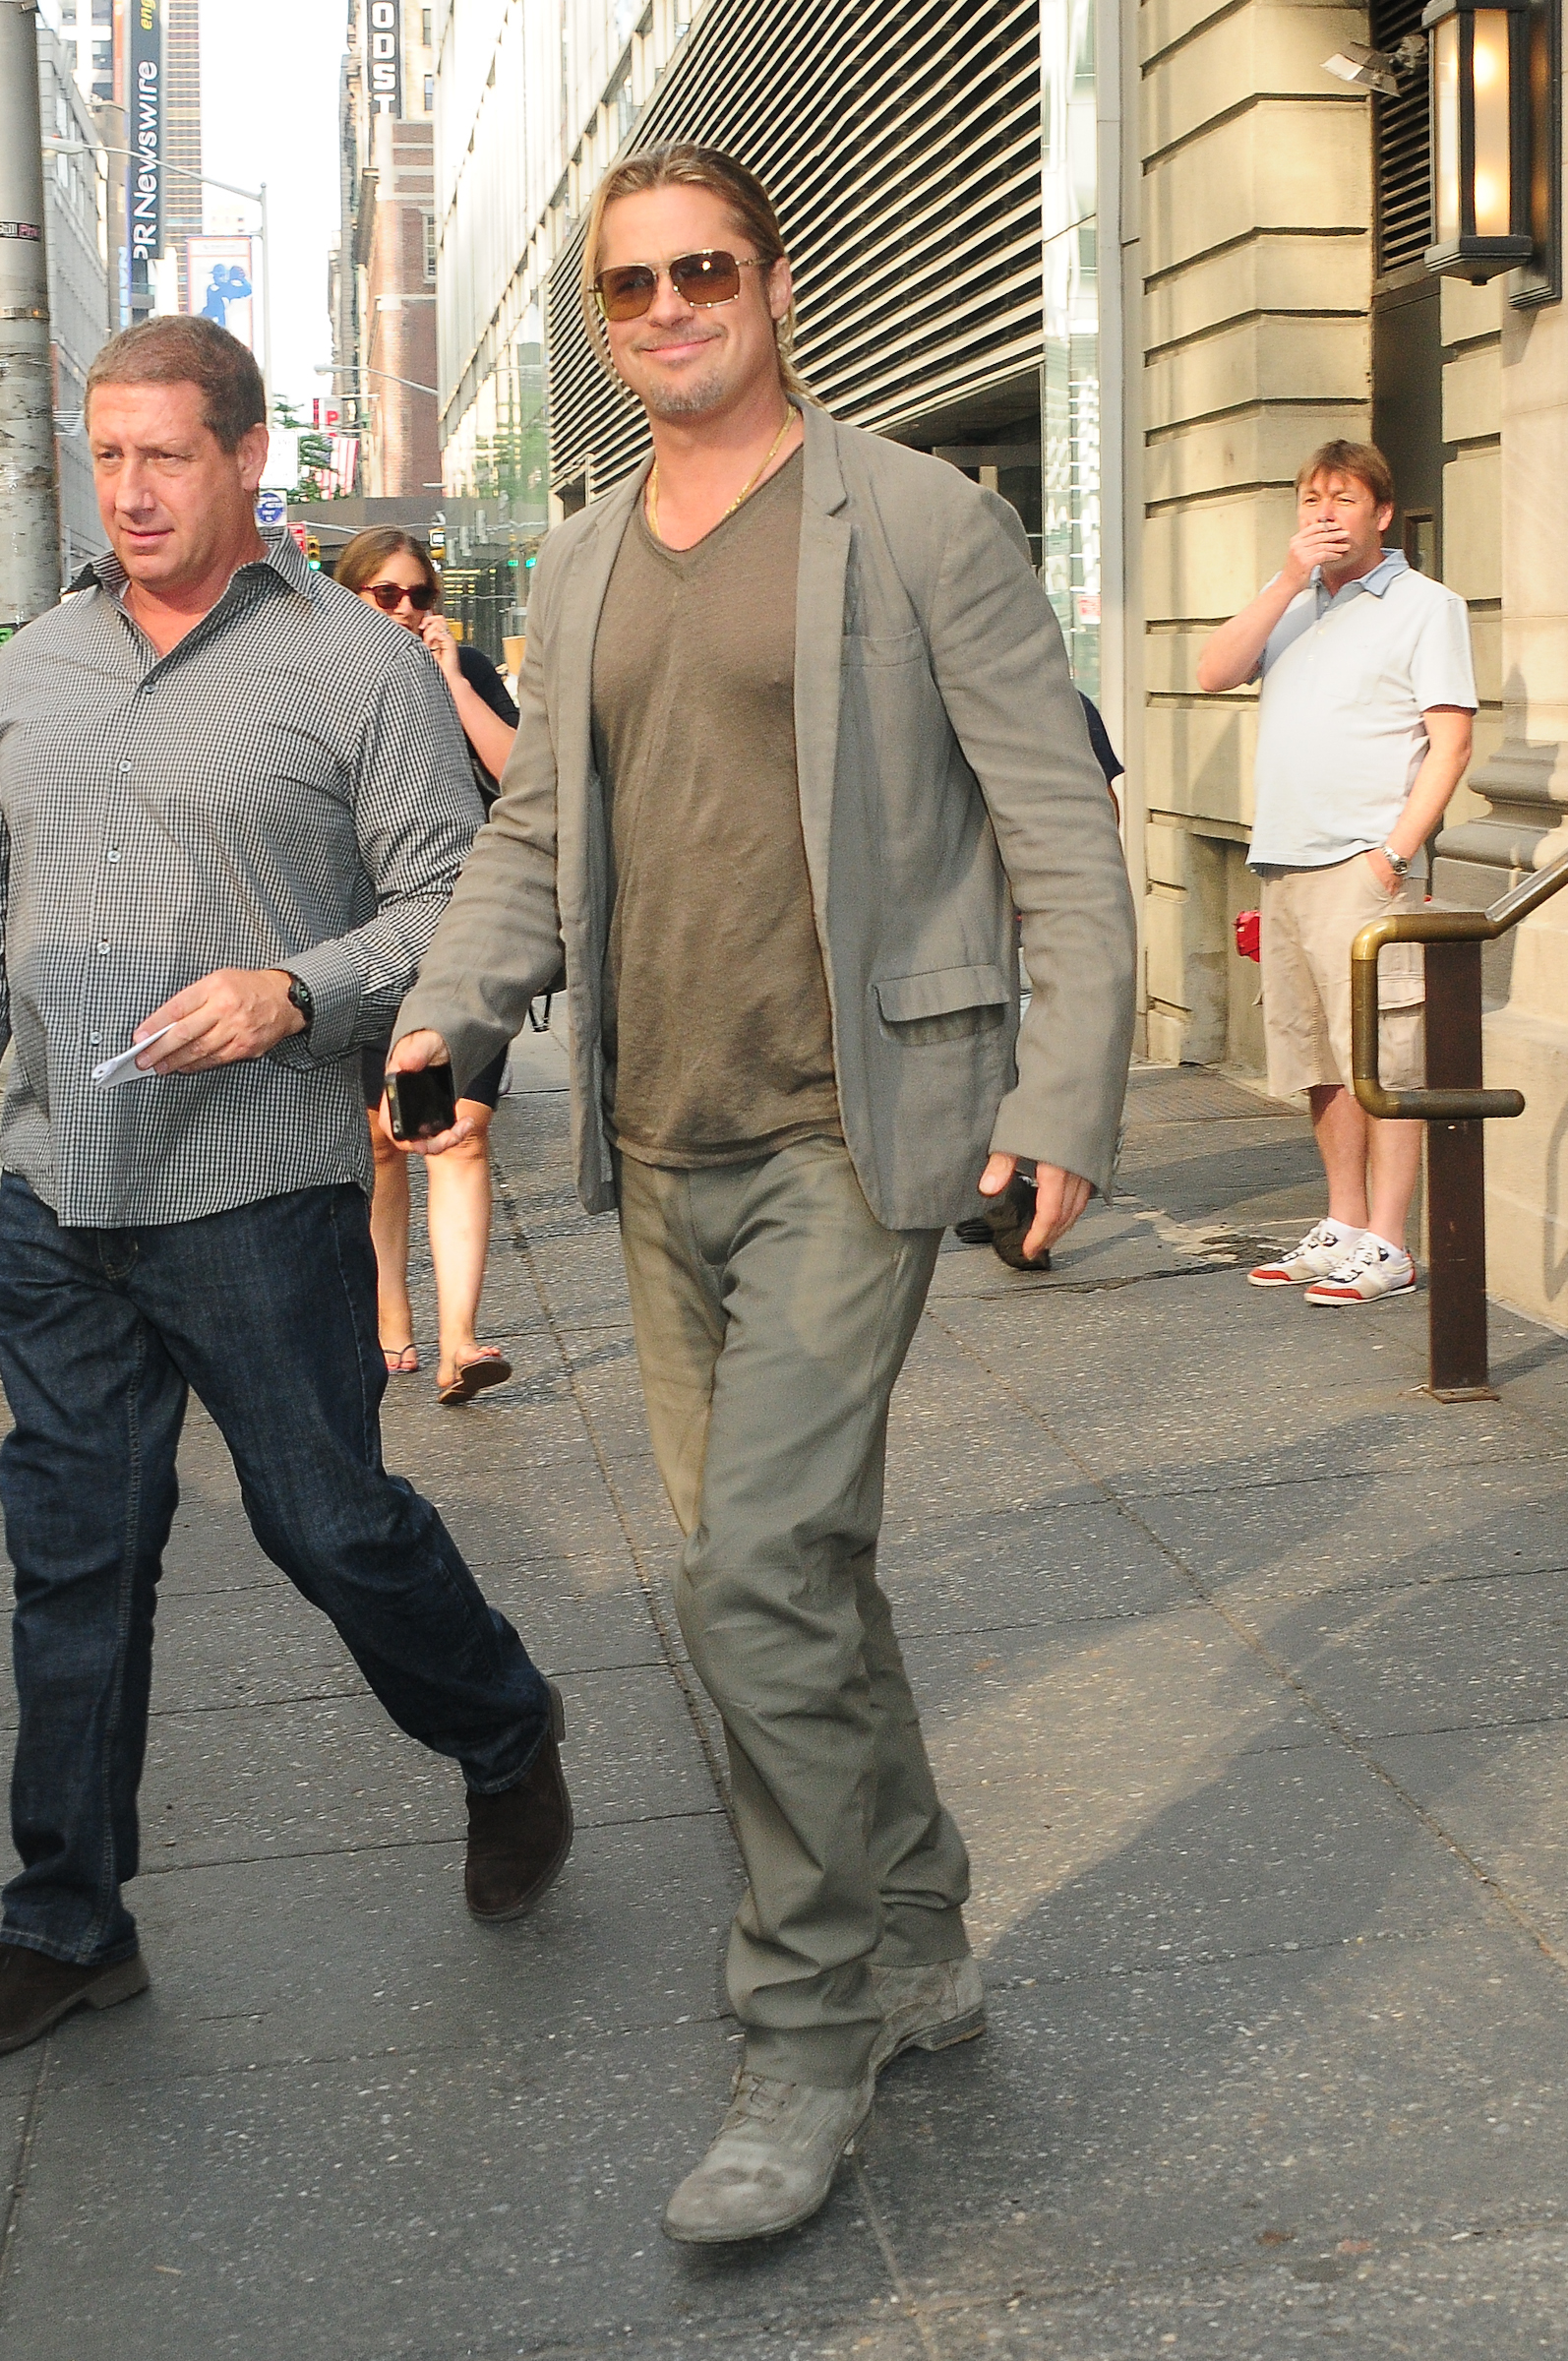 Brad Pitt makes an appearance at 'Good Morning America' in NYC